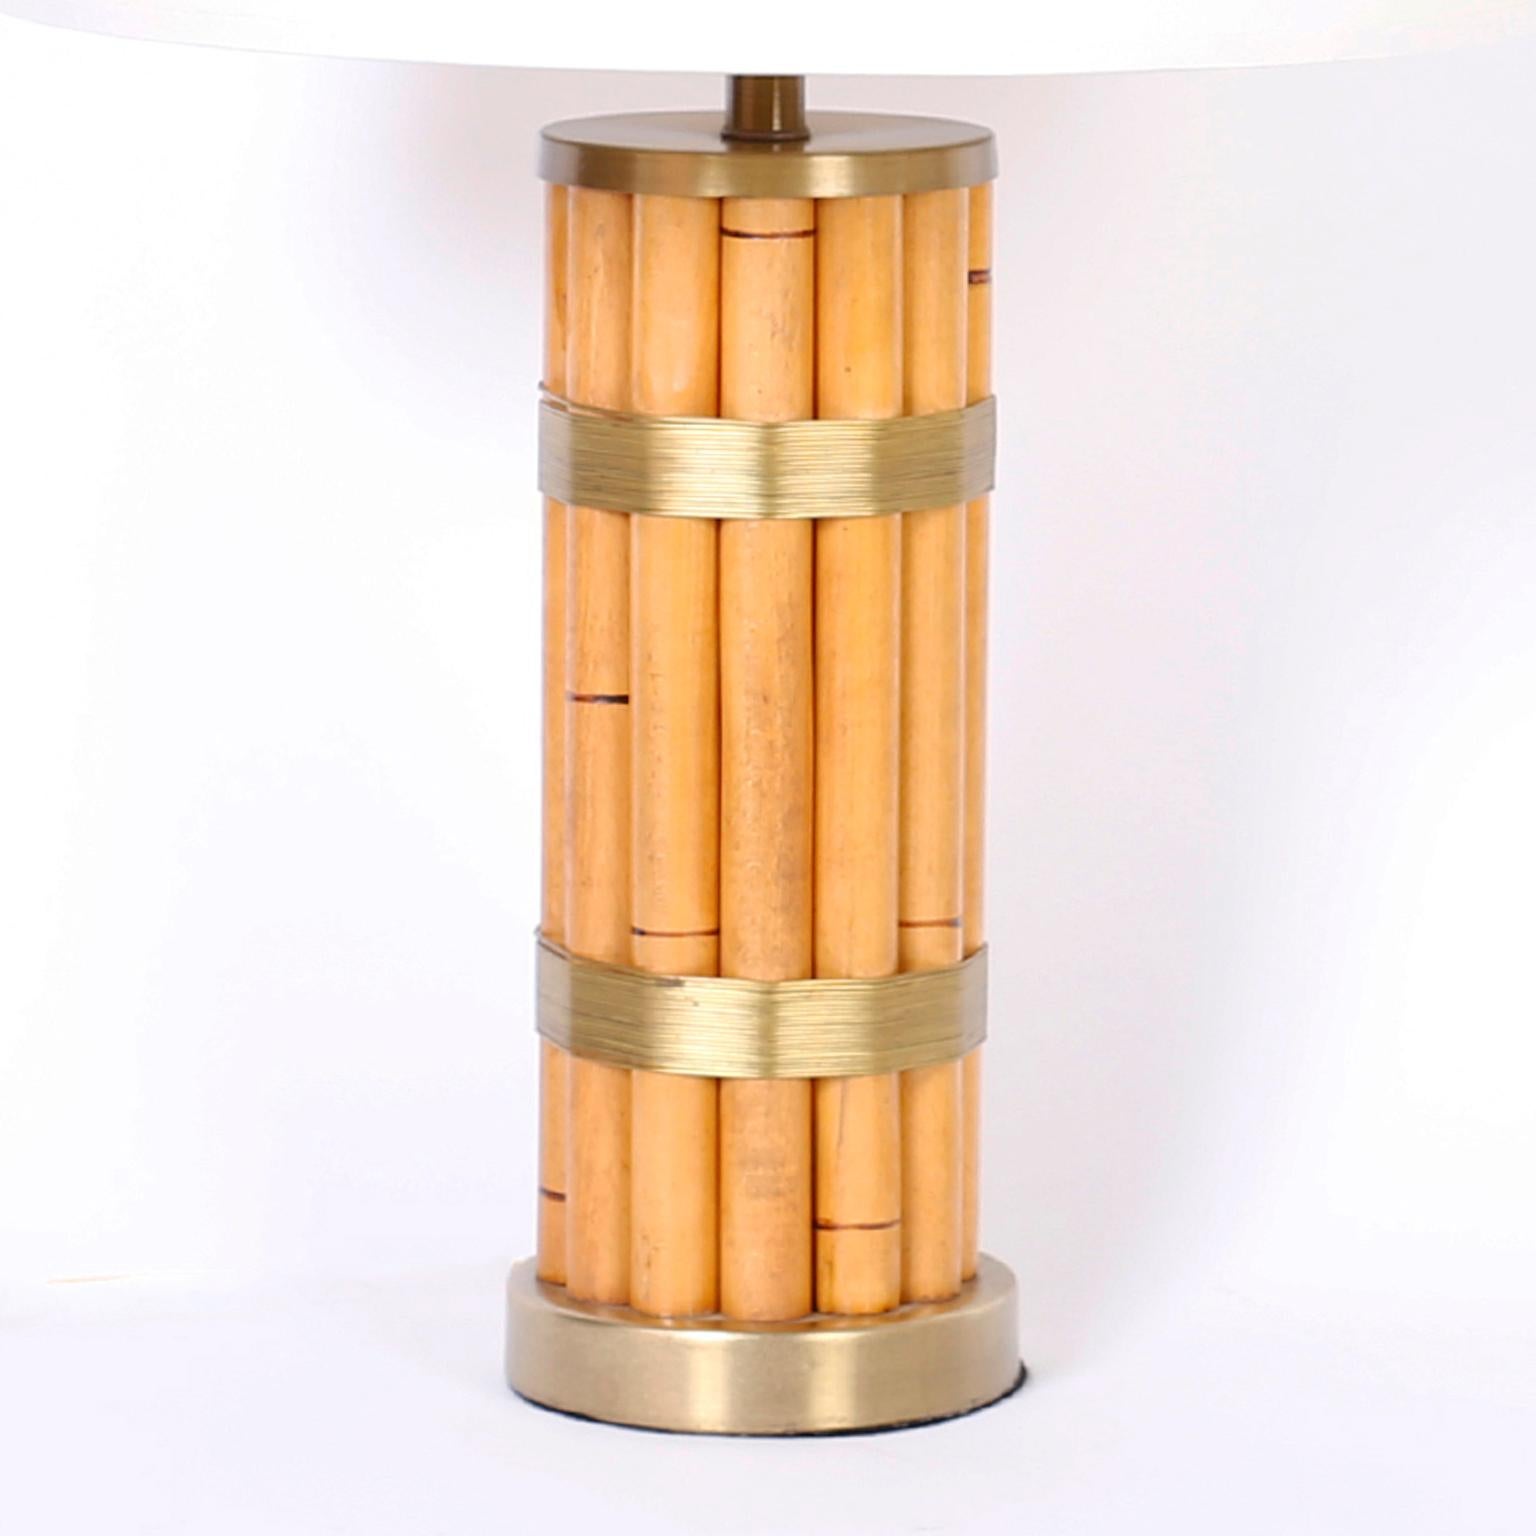 In vogue pair of table lamps composed of hardwood turned rods, probably ash, burned like bamboo and banded with brass string.